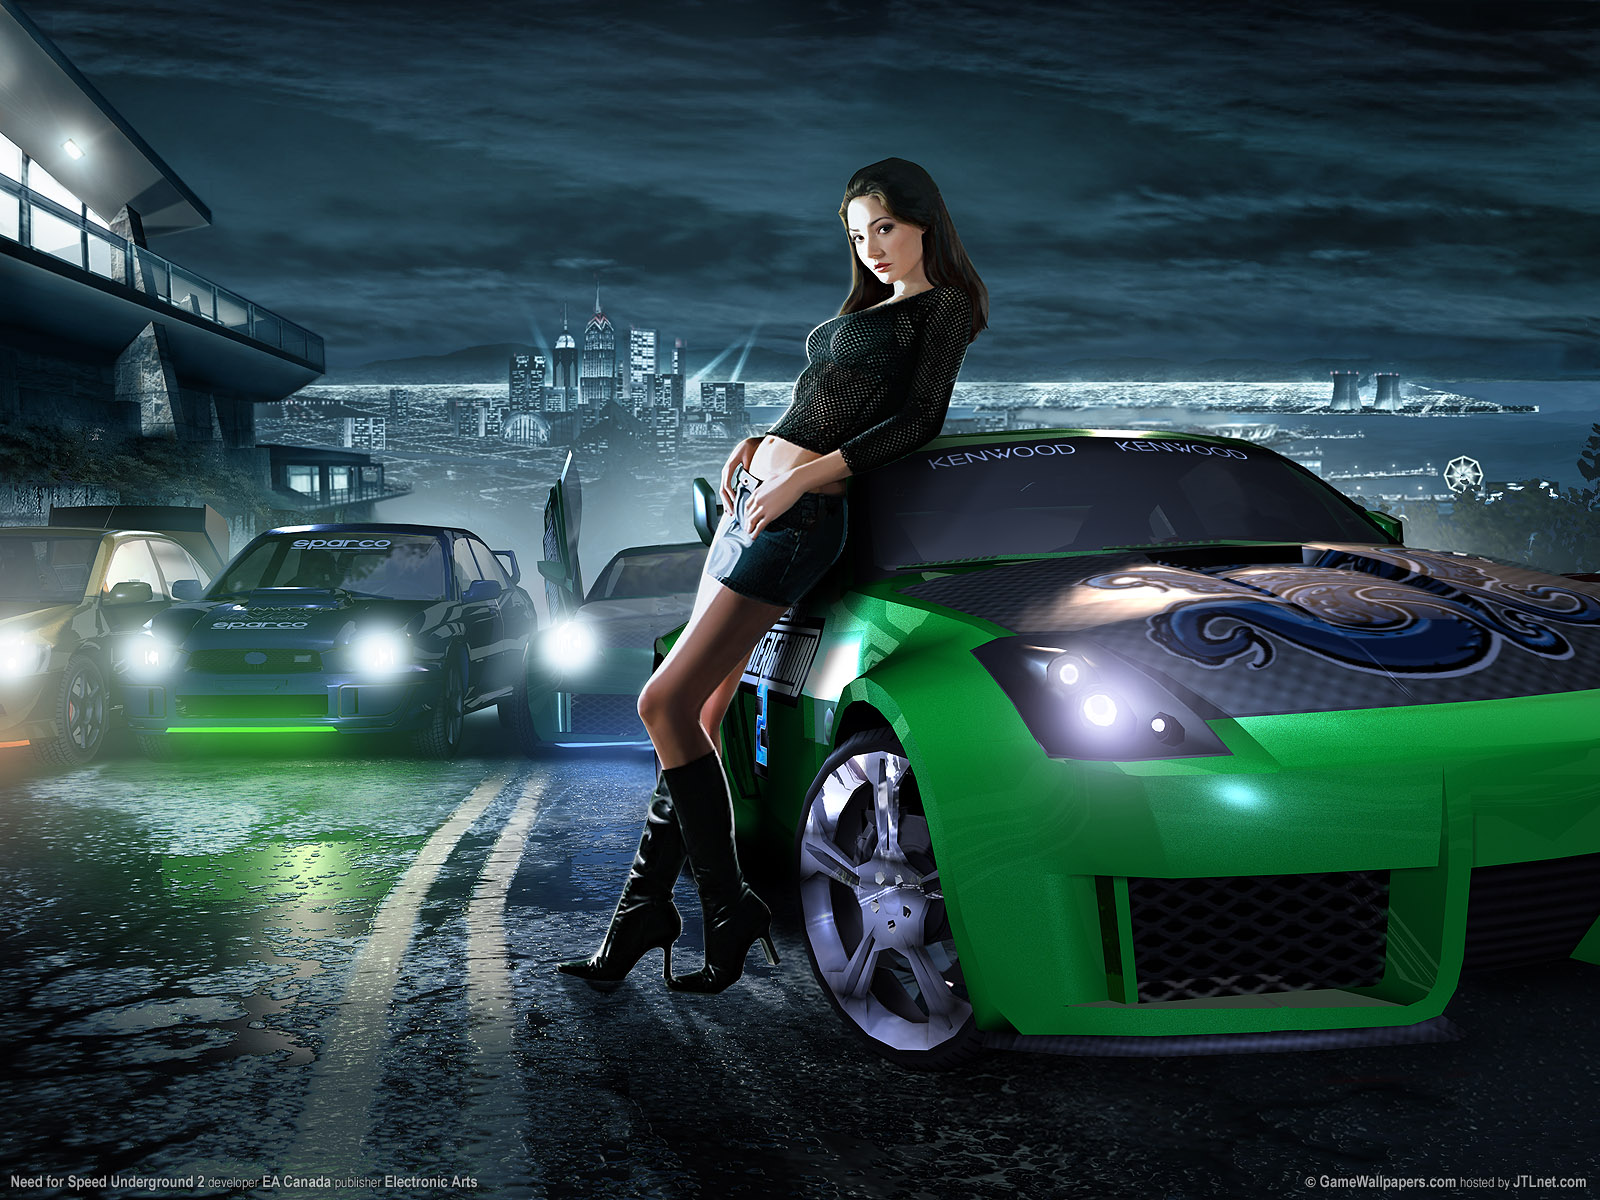 need for speed underground 2 wallpaper,vehicle,car,automotive design,performance car,sports car